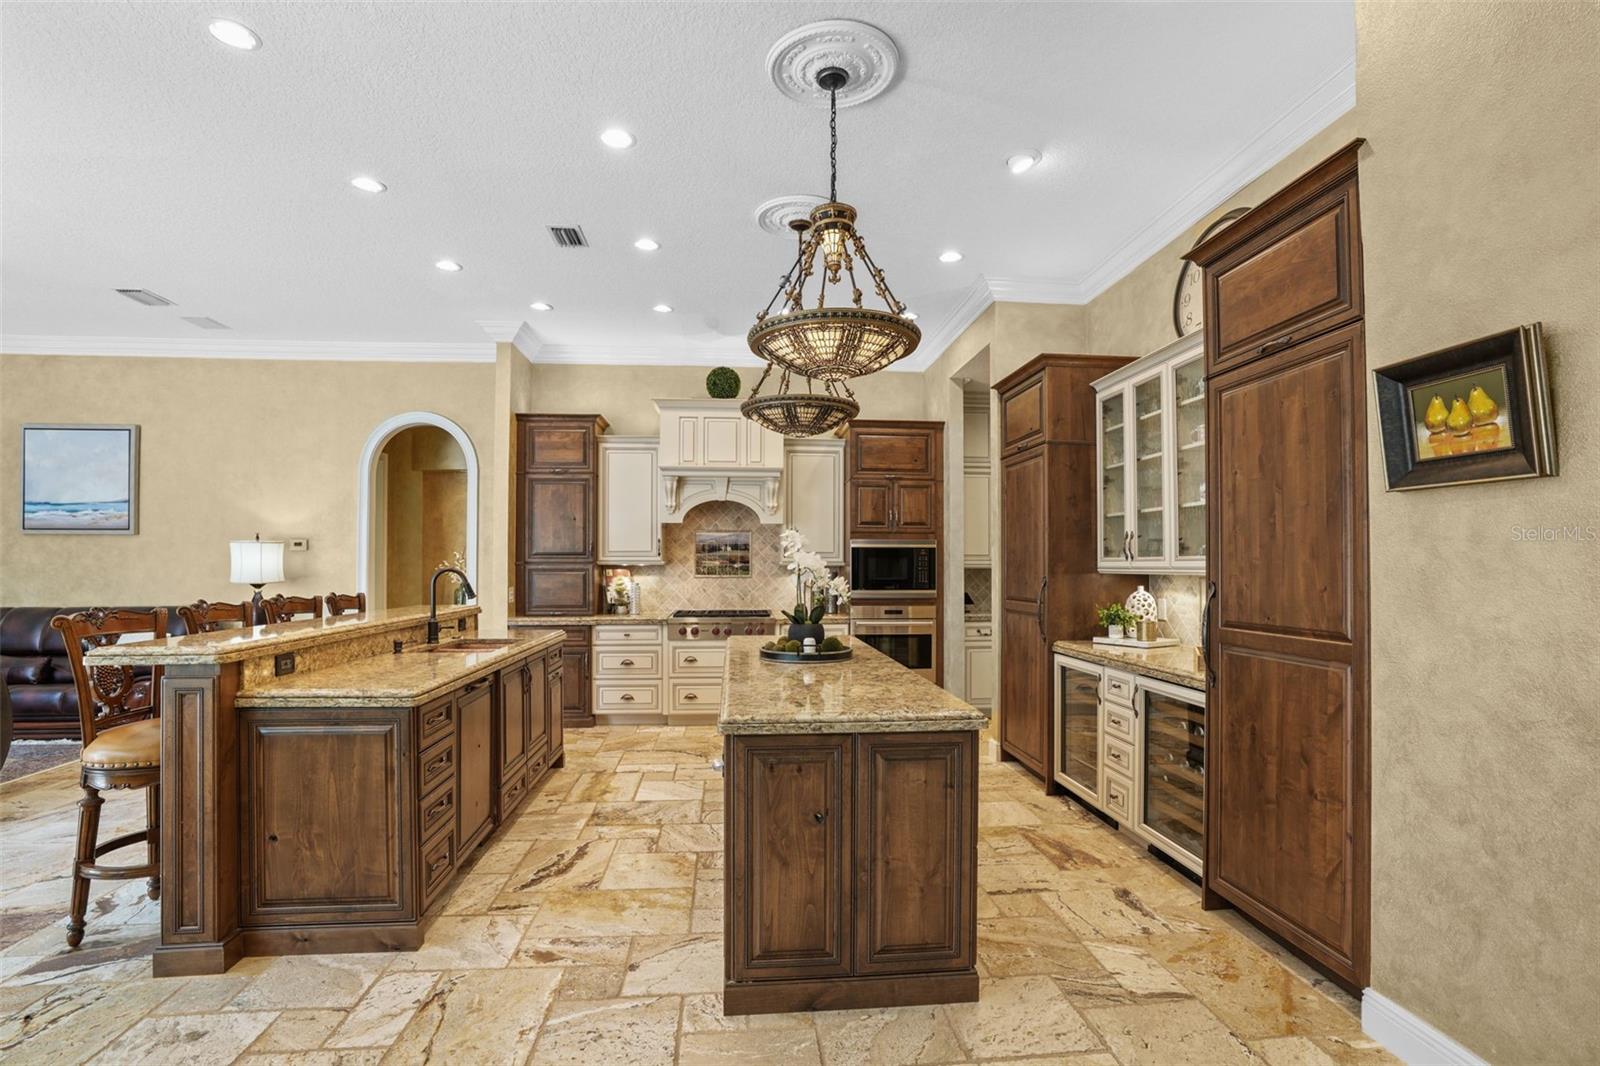 Double island, double stacked granite kitchen.